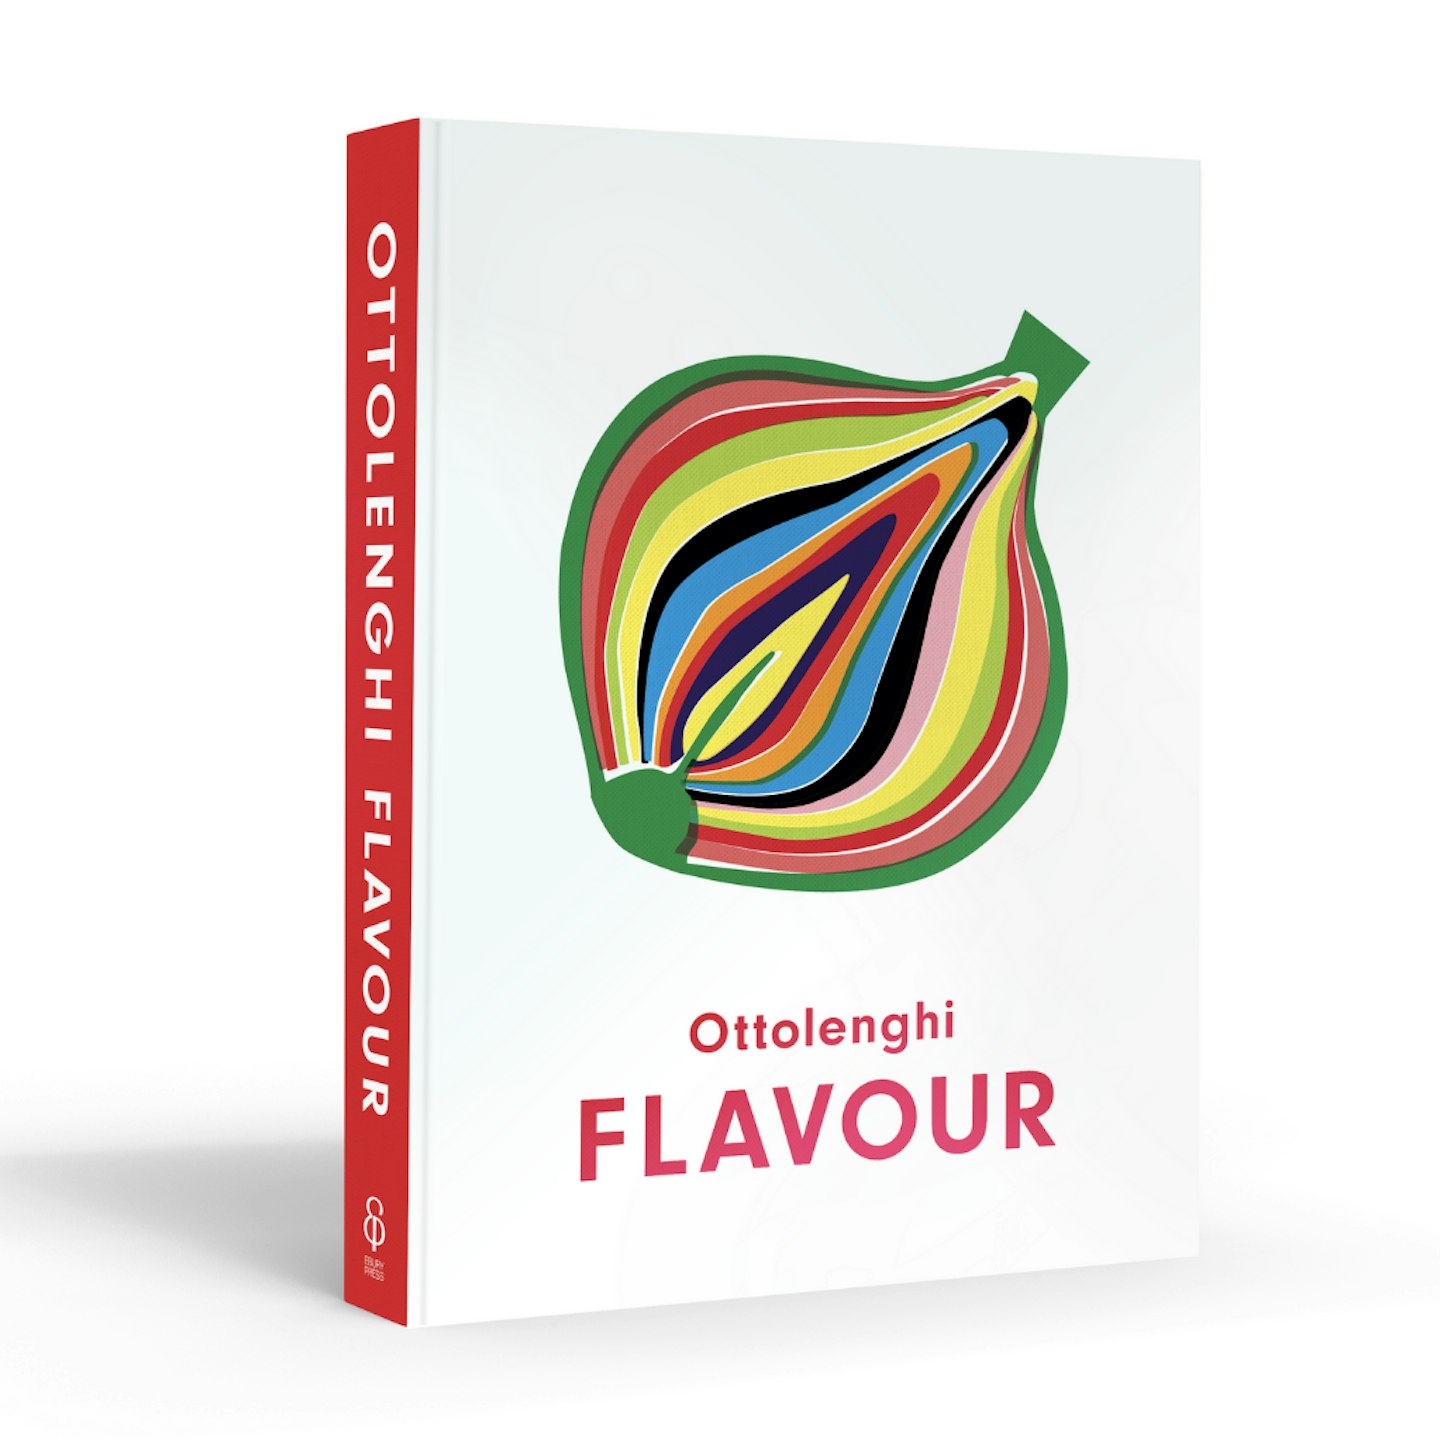 Ottolenghi FLAVOUR Hardcover